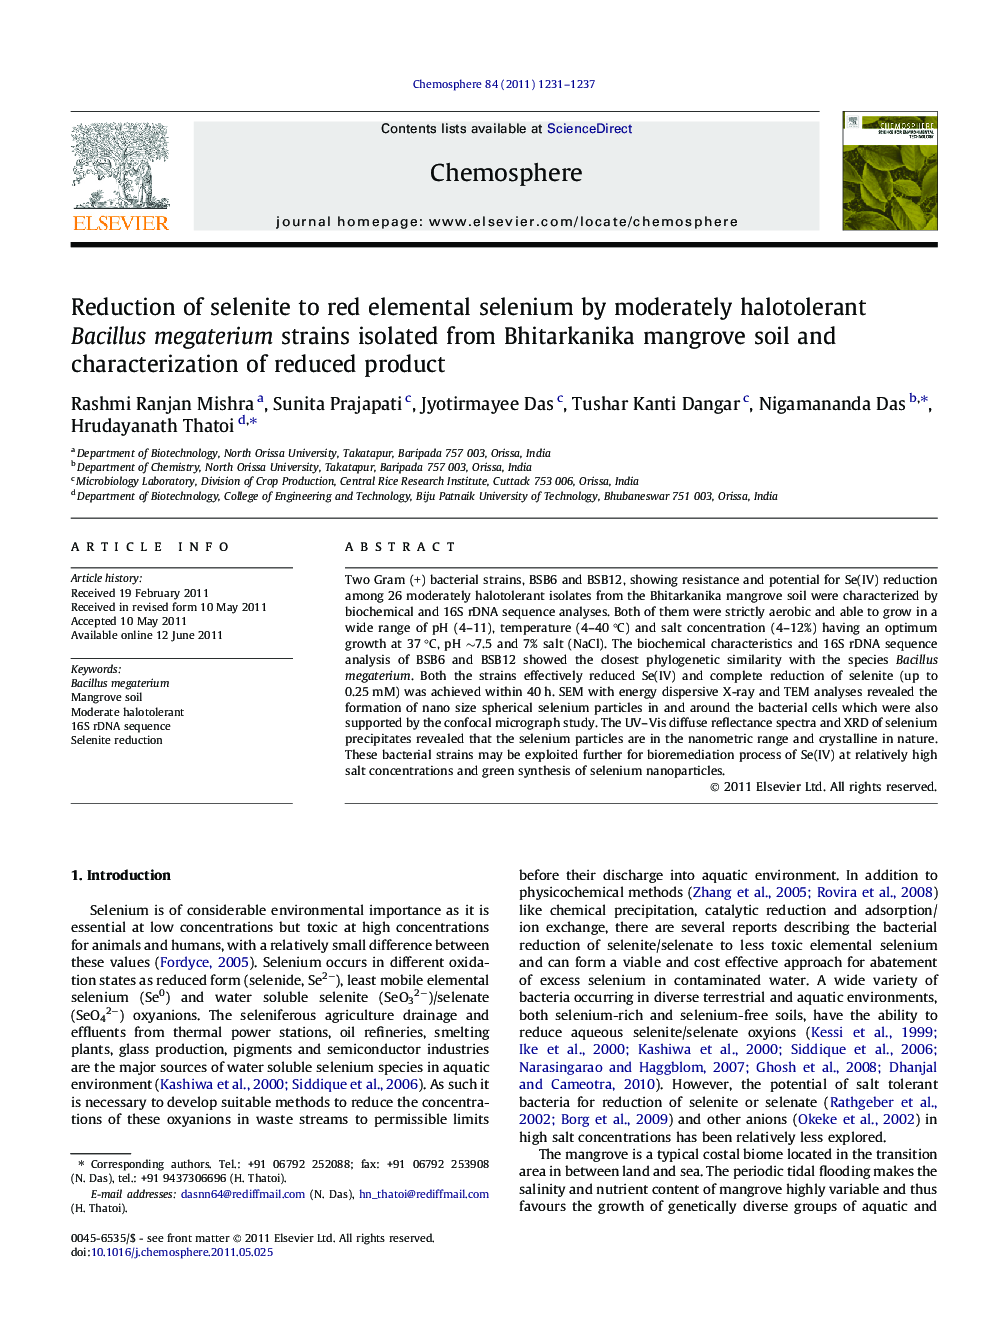 Reduction of selenite to red elemental selenium by moderately halotolerant Bacillus megaterium strains isolated from Bhitarkanika mangrove soil and characterization of reduced product